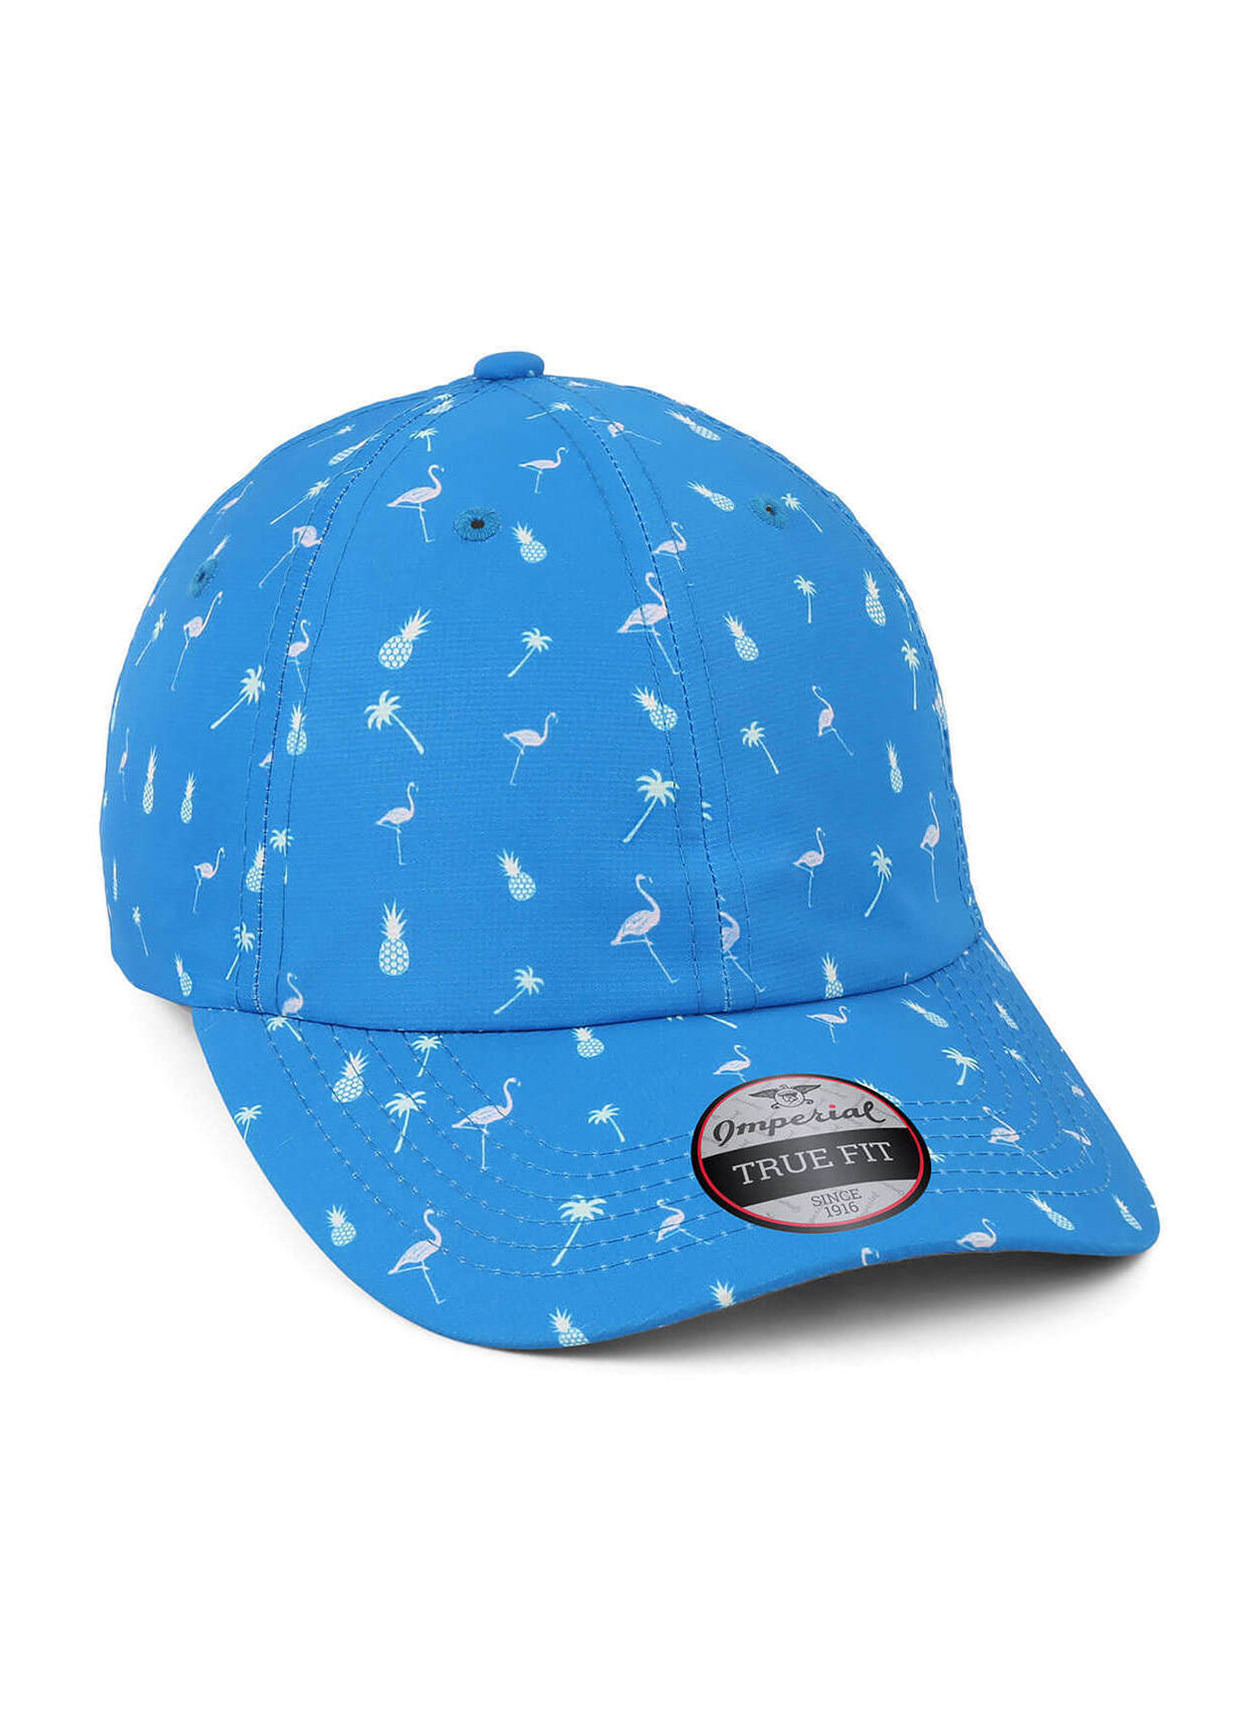 Imperial Pacific / Tropical The Alter Ego Pattered Performance Hat